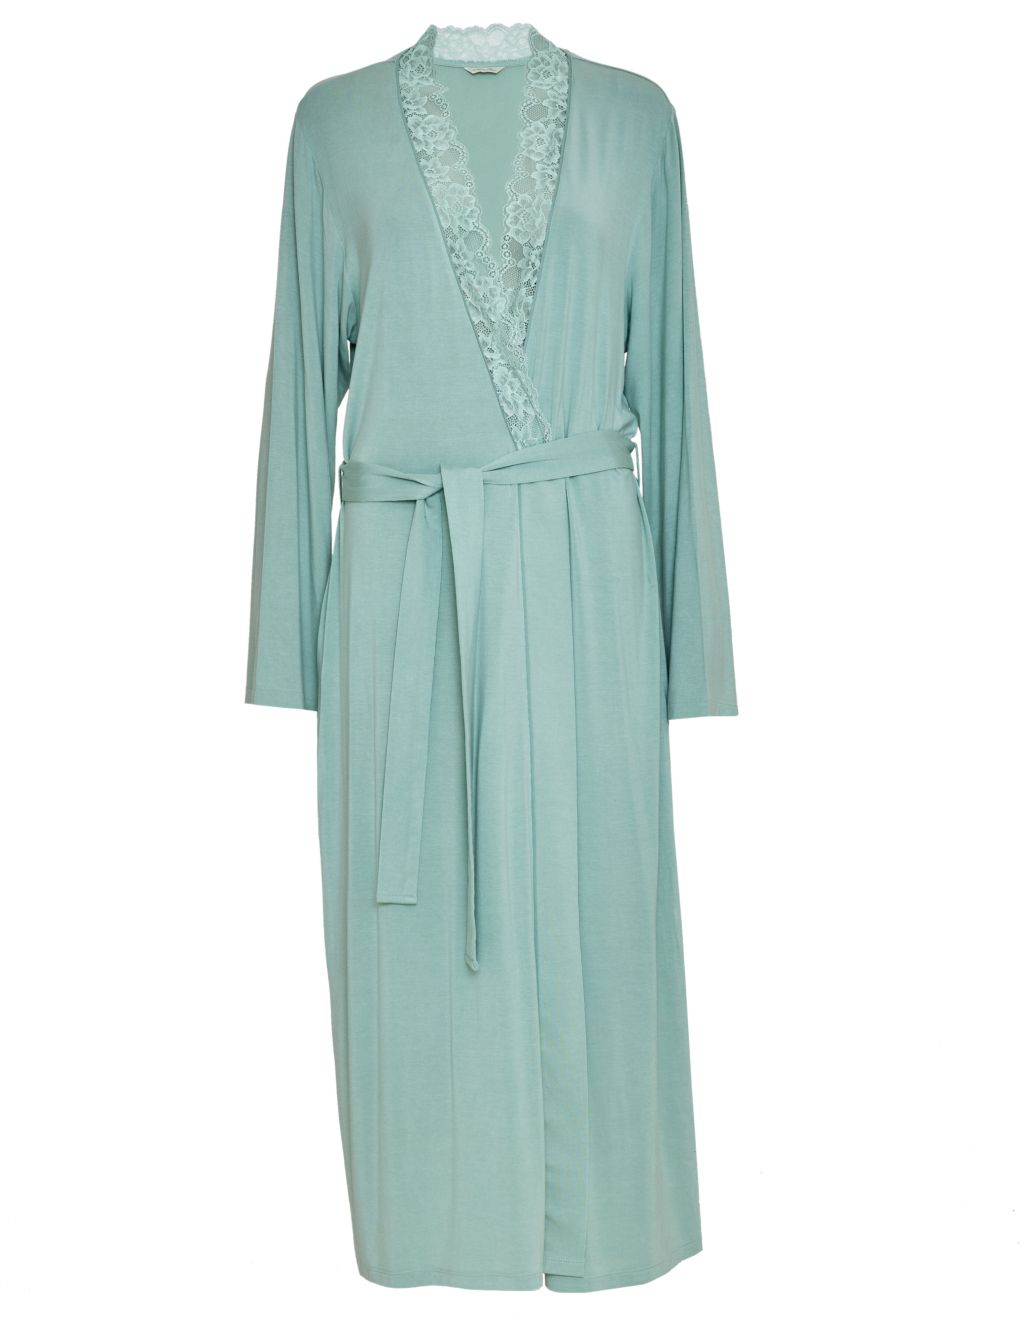 Jersey Lace Trim Dressing Gown | Cyberjammies | M&S